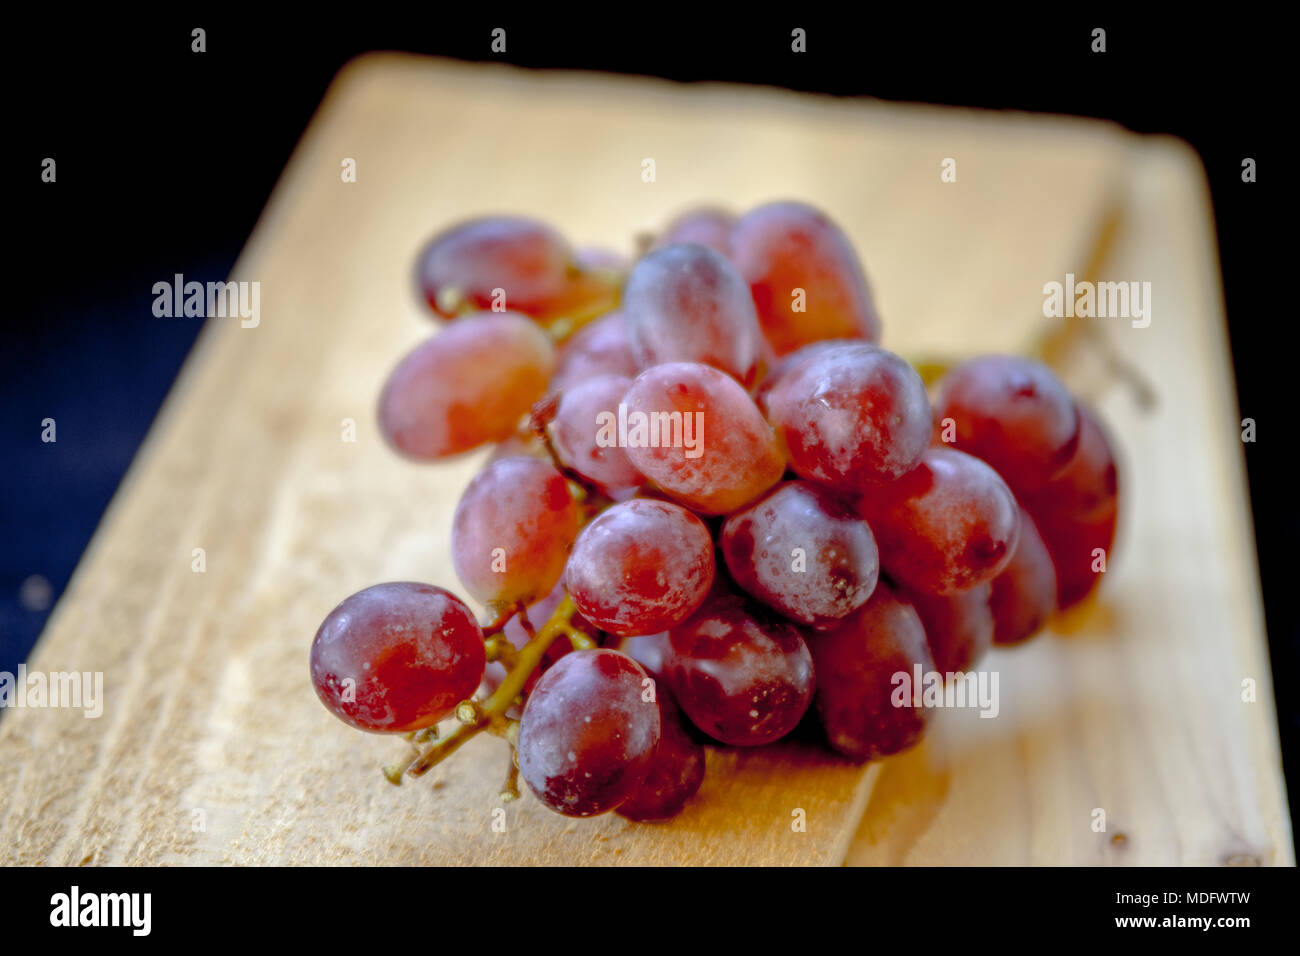 Bunch of grapes on a chopping board Stock Photo